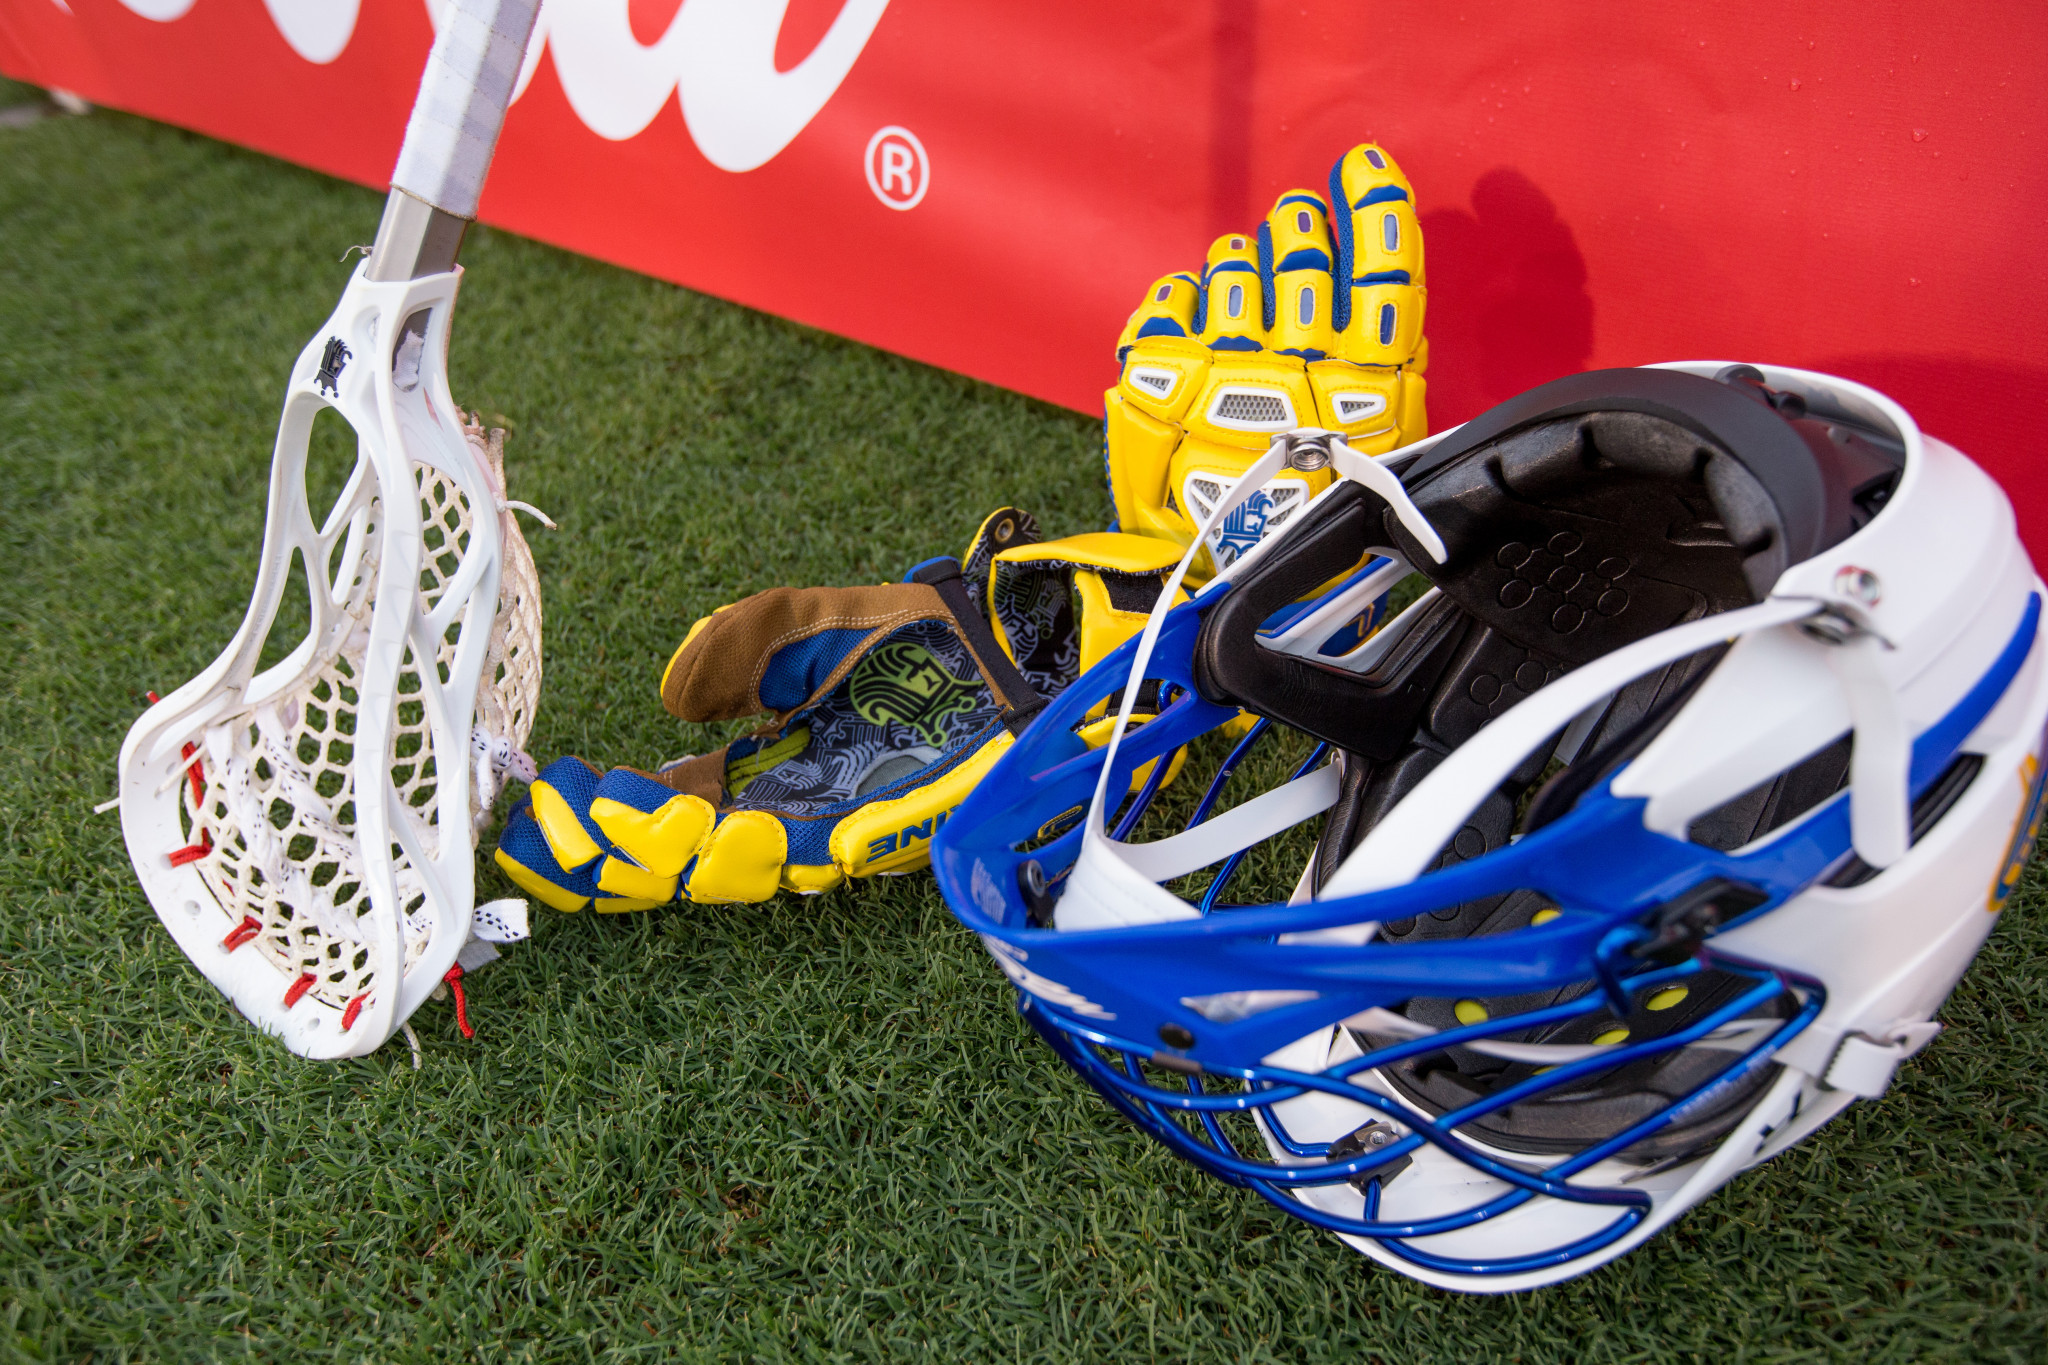 Indonesia, India and Vietnam join World Lacrosse as provisional members